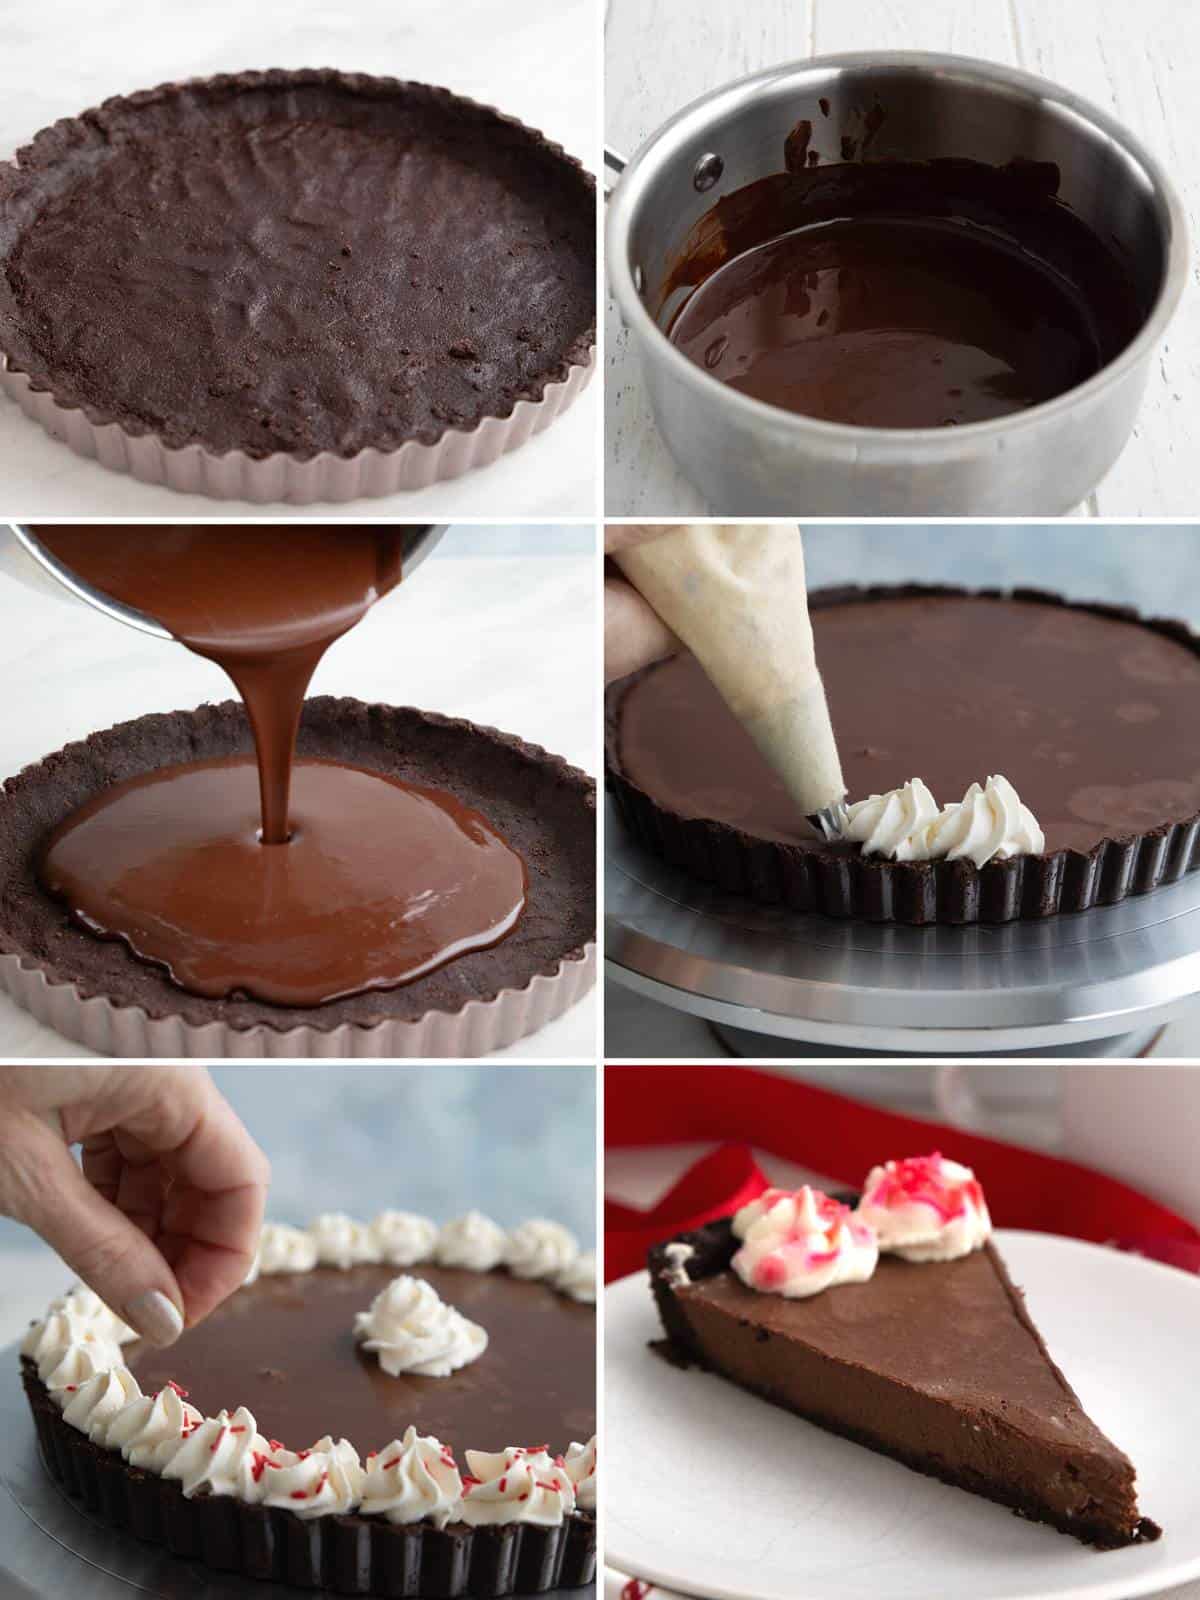 A collage of 6 images showing how to make Keto Peppermint Truffle Tart.